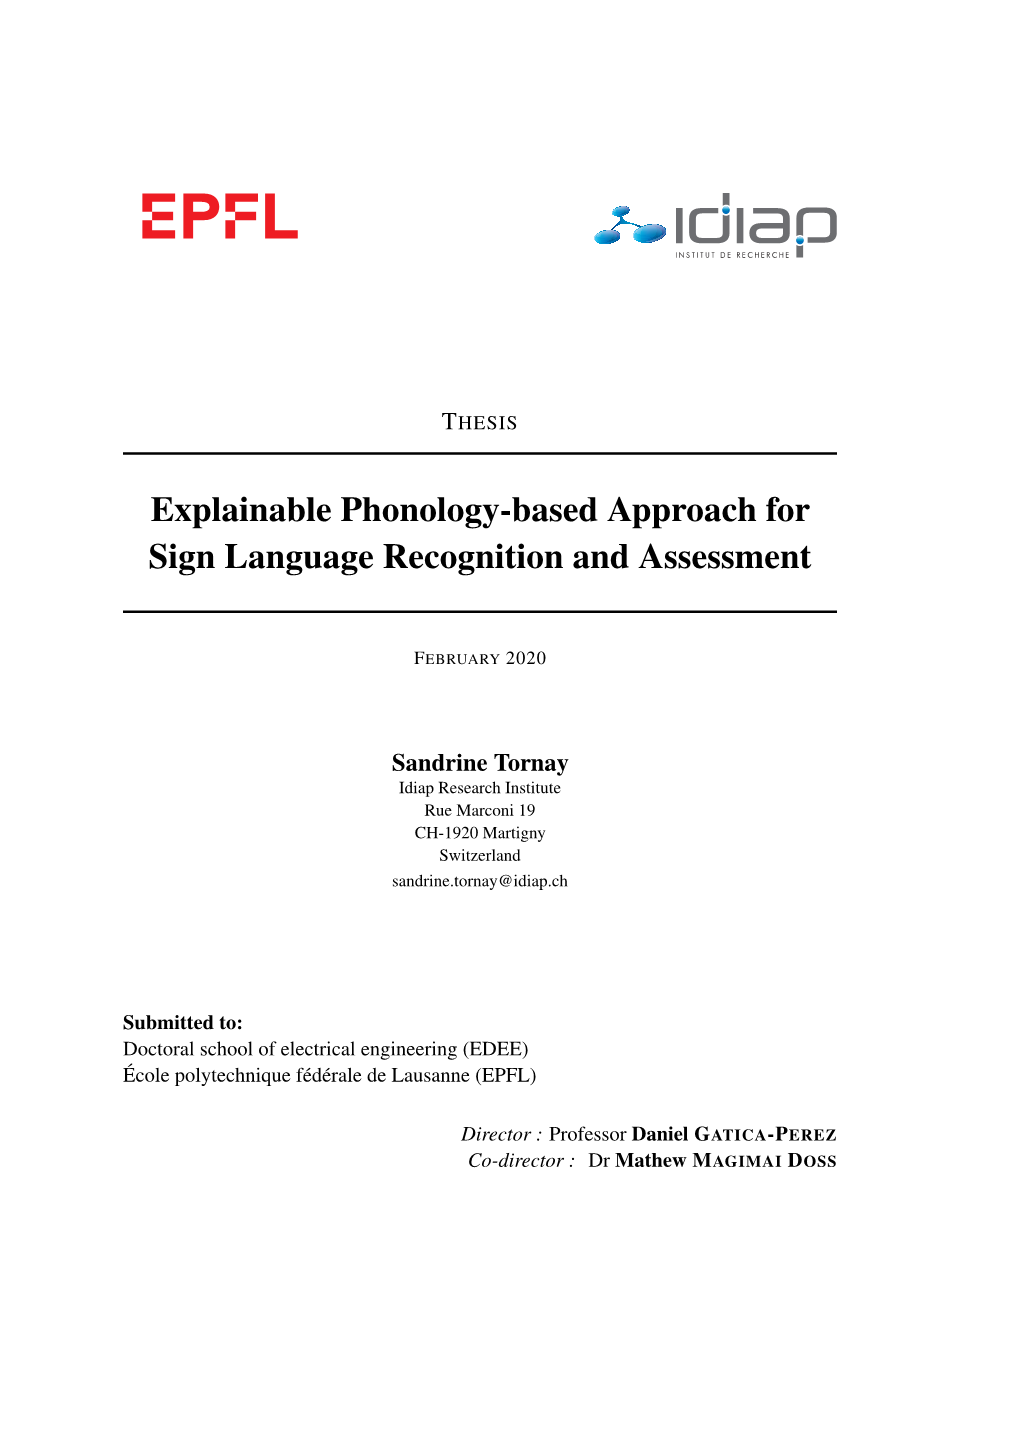 Explainable Phonology-Based Approach for Sign Language Recognition and Assessment